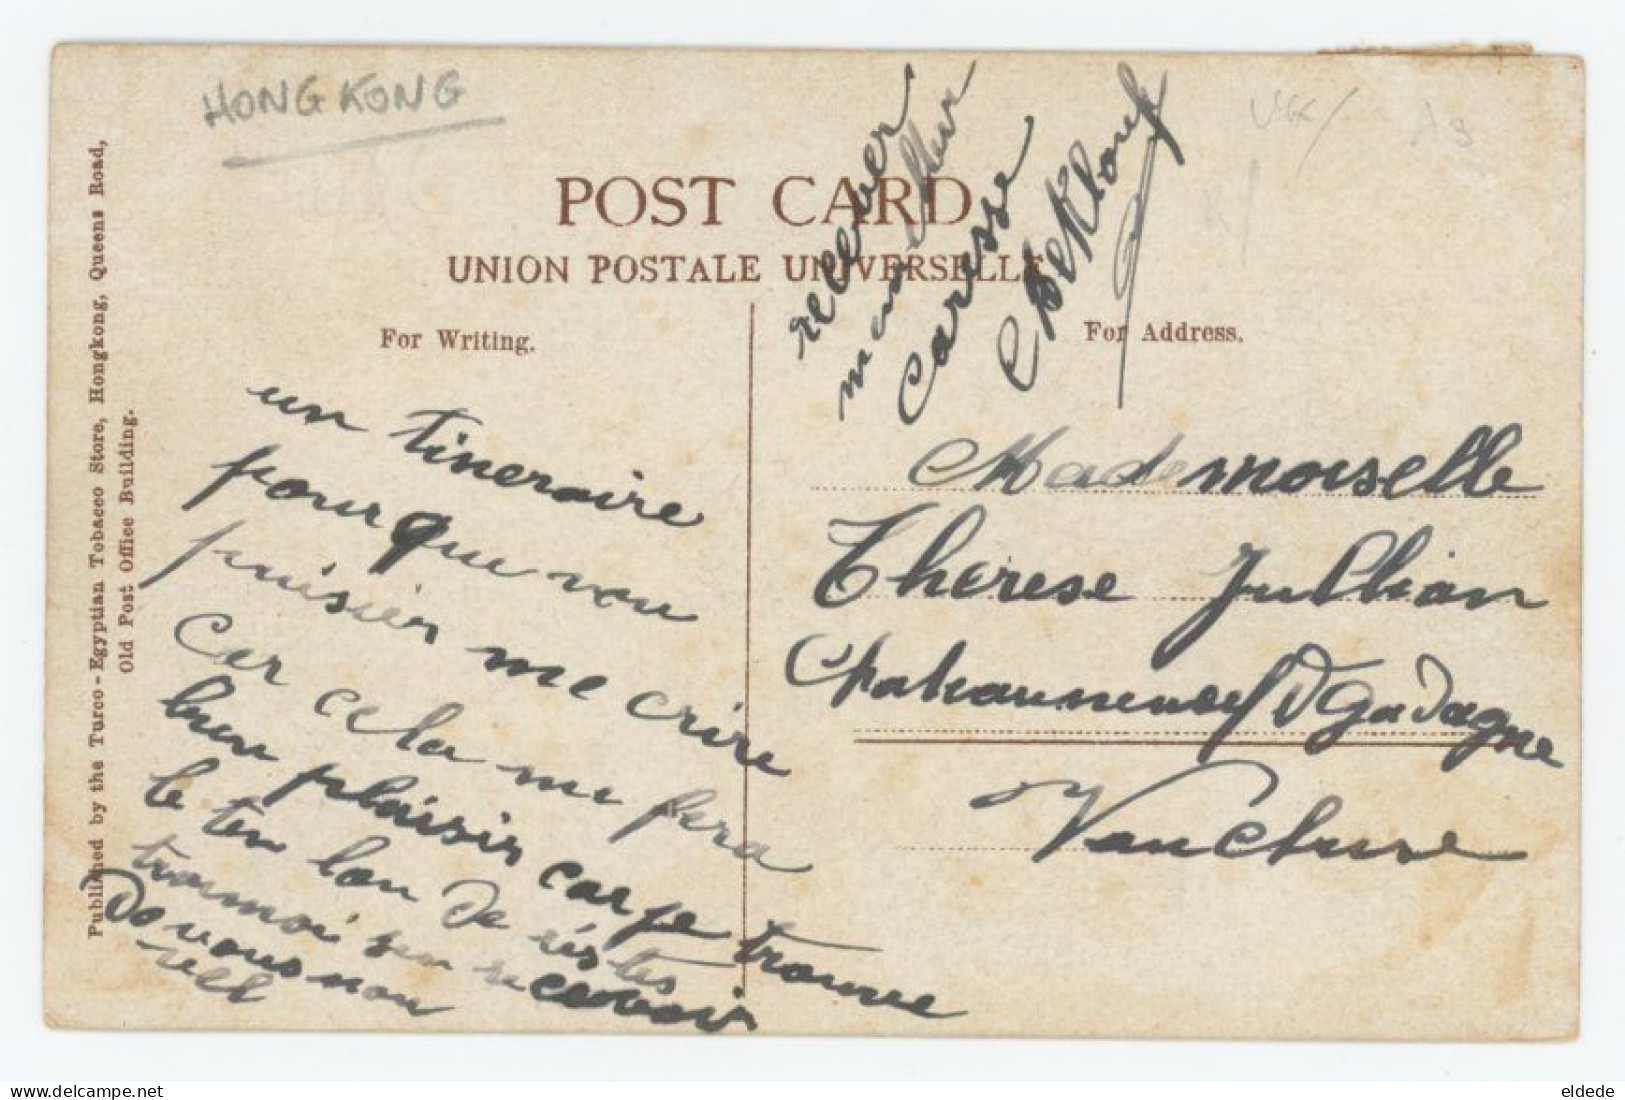 Hand Colored Hongkong Queen's Road West  Ship Postmark To Chateauneuf Gadagne Vaucluse - Cina